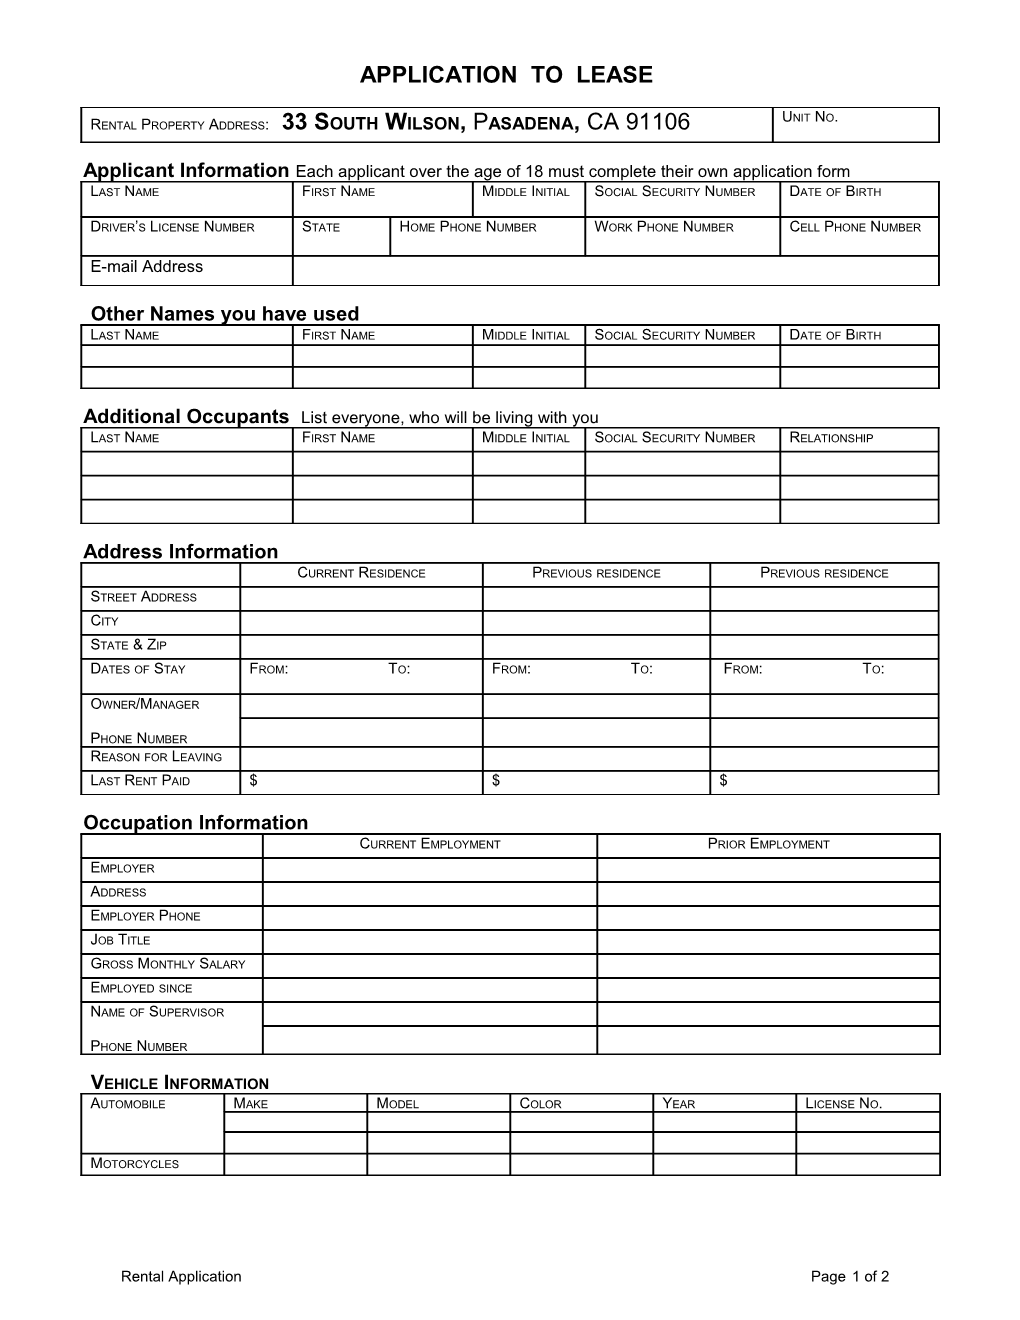 Application to Lease